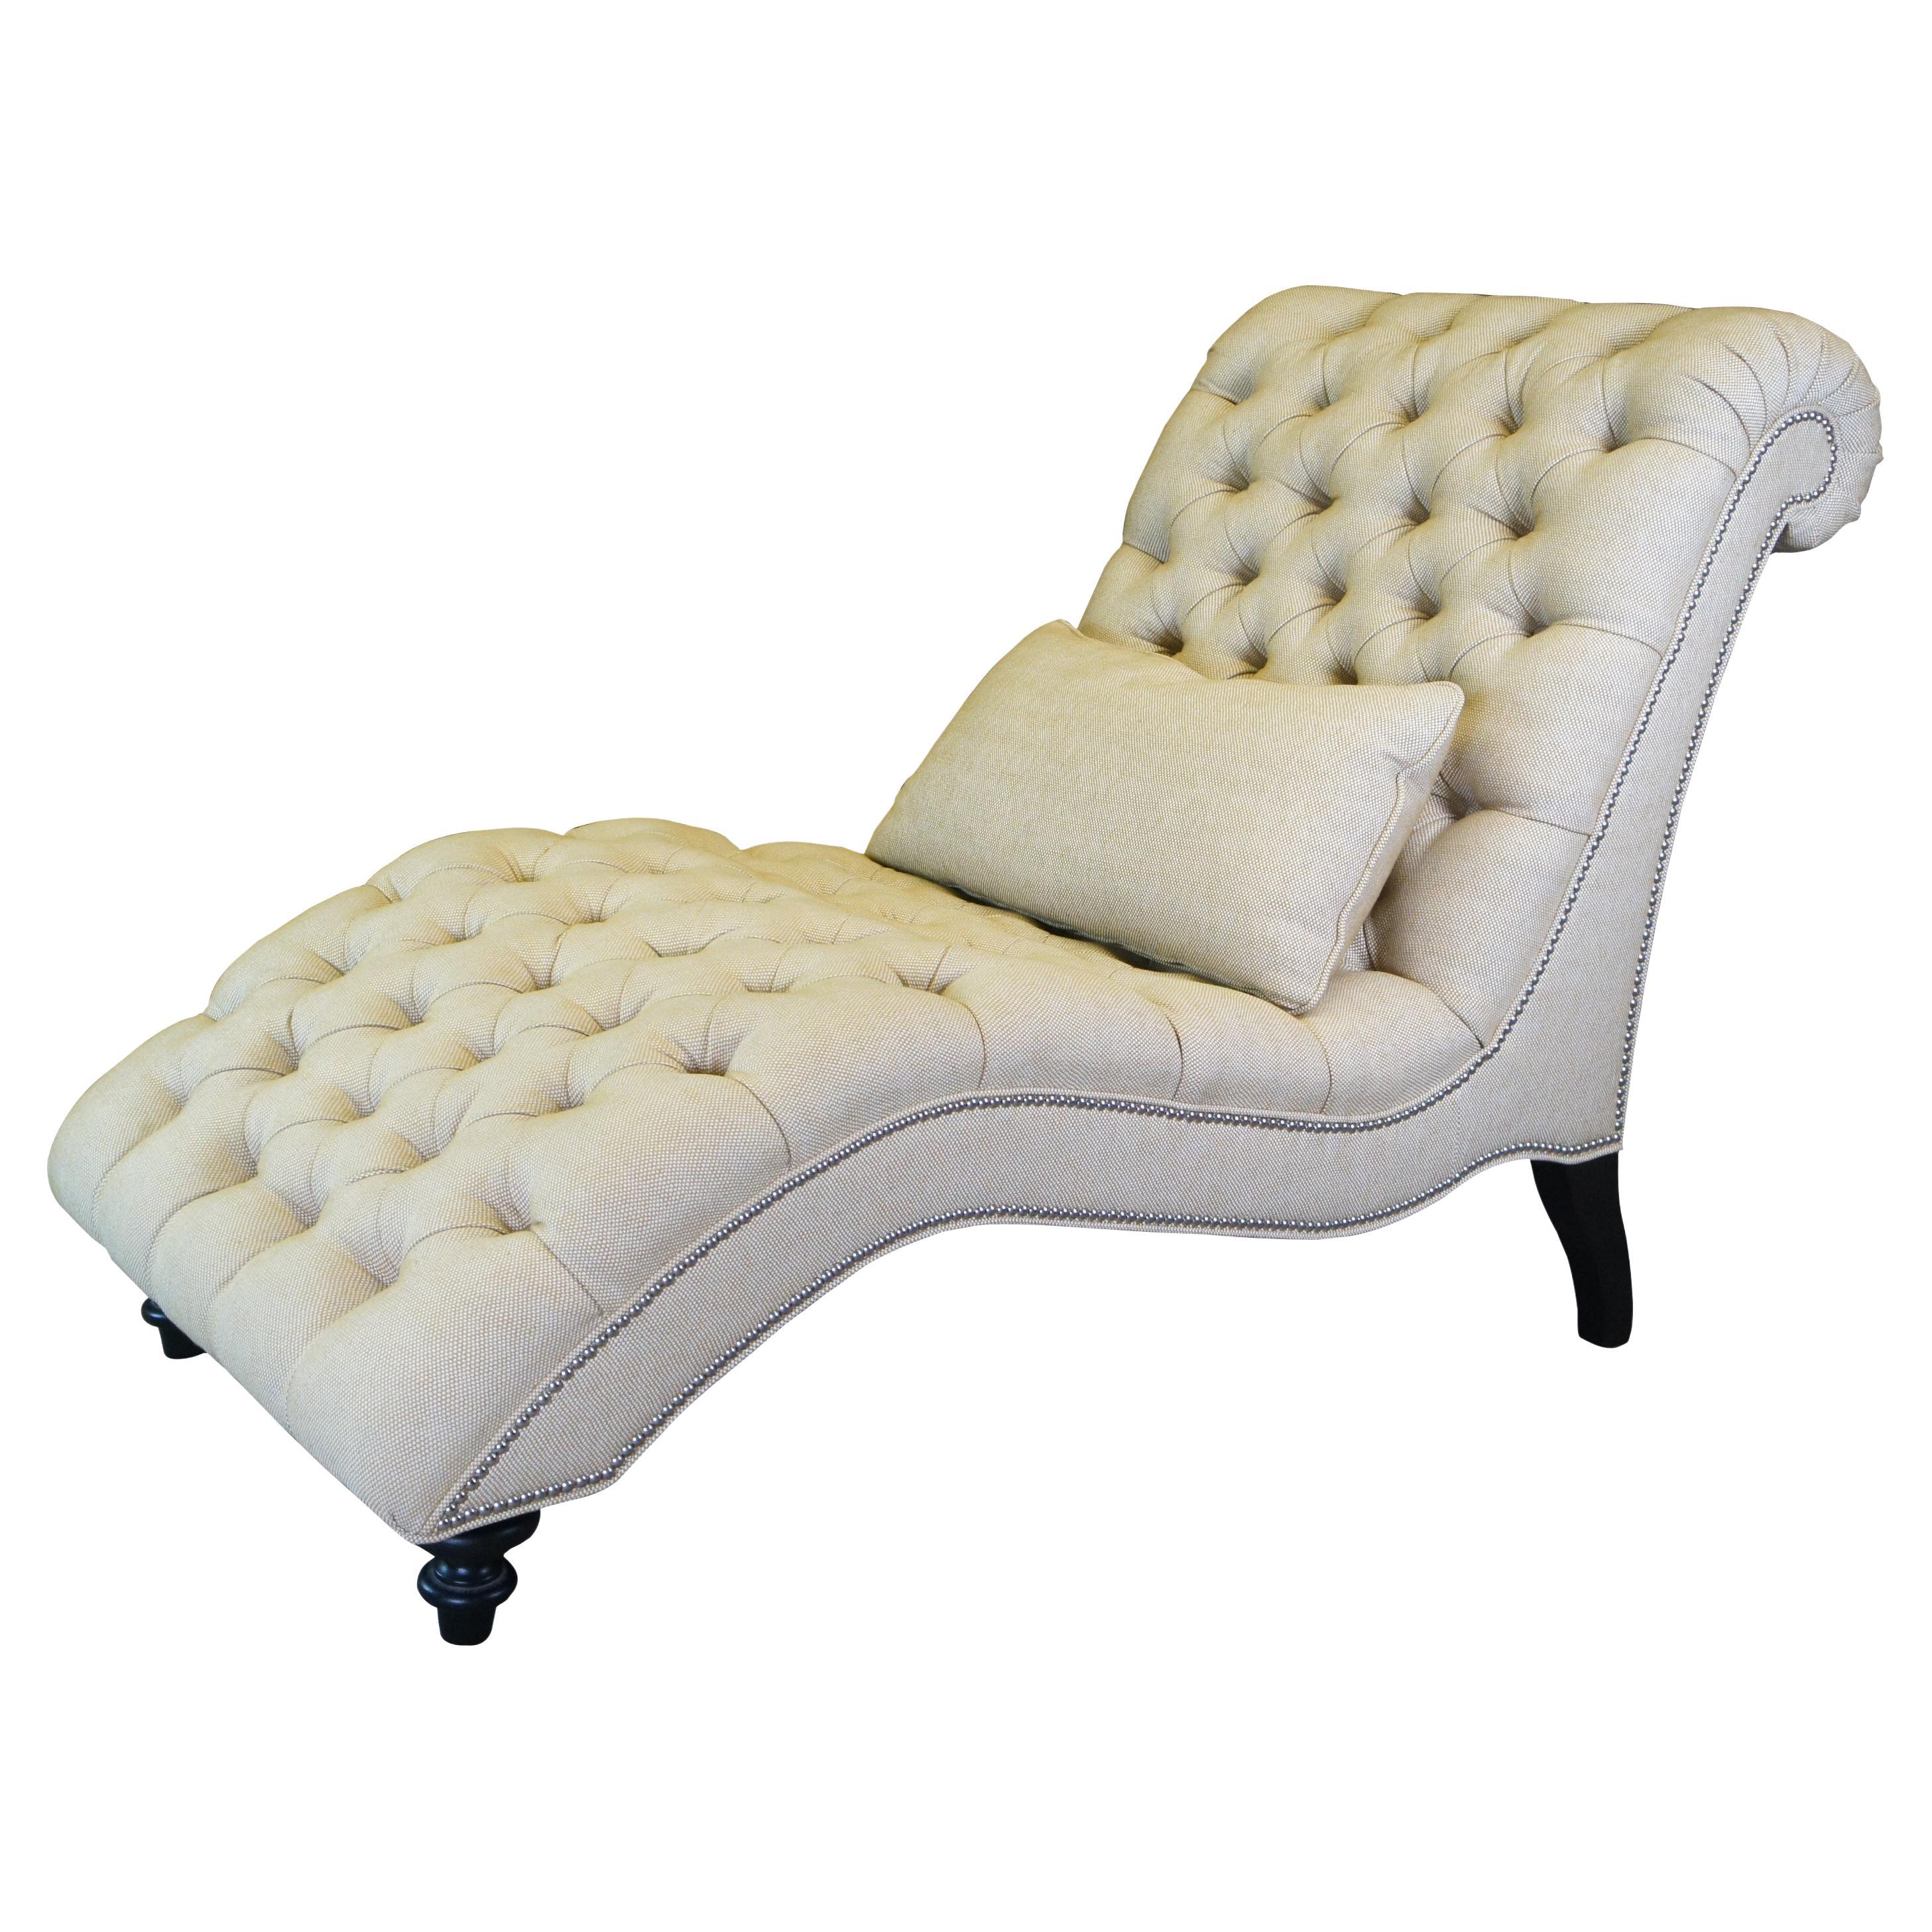 Lexington Upholstery Traditional Beige Tufted Althena Chaise Lounge 7802-75 For Sale